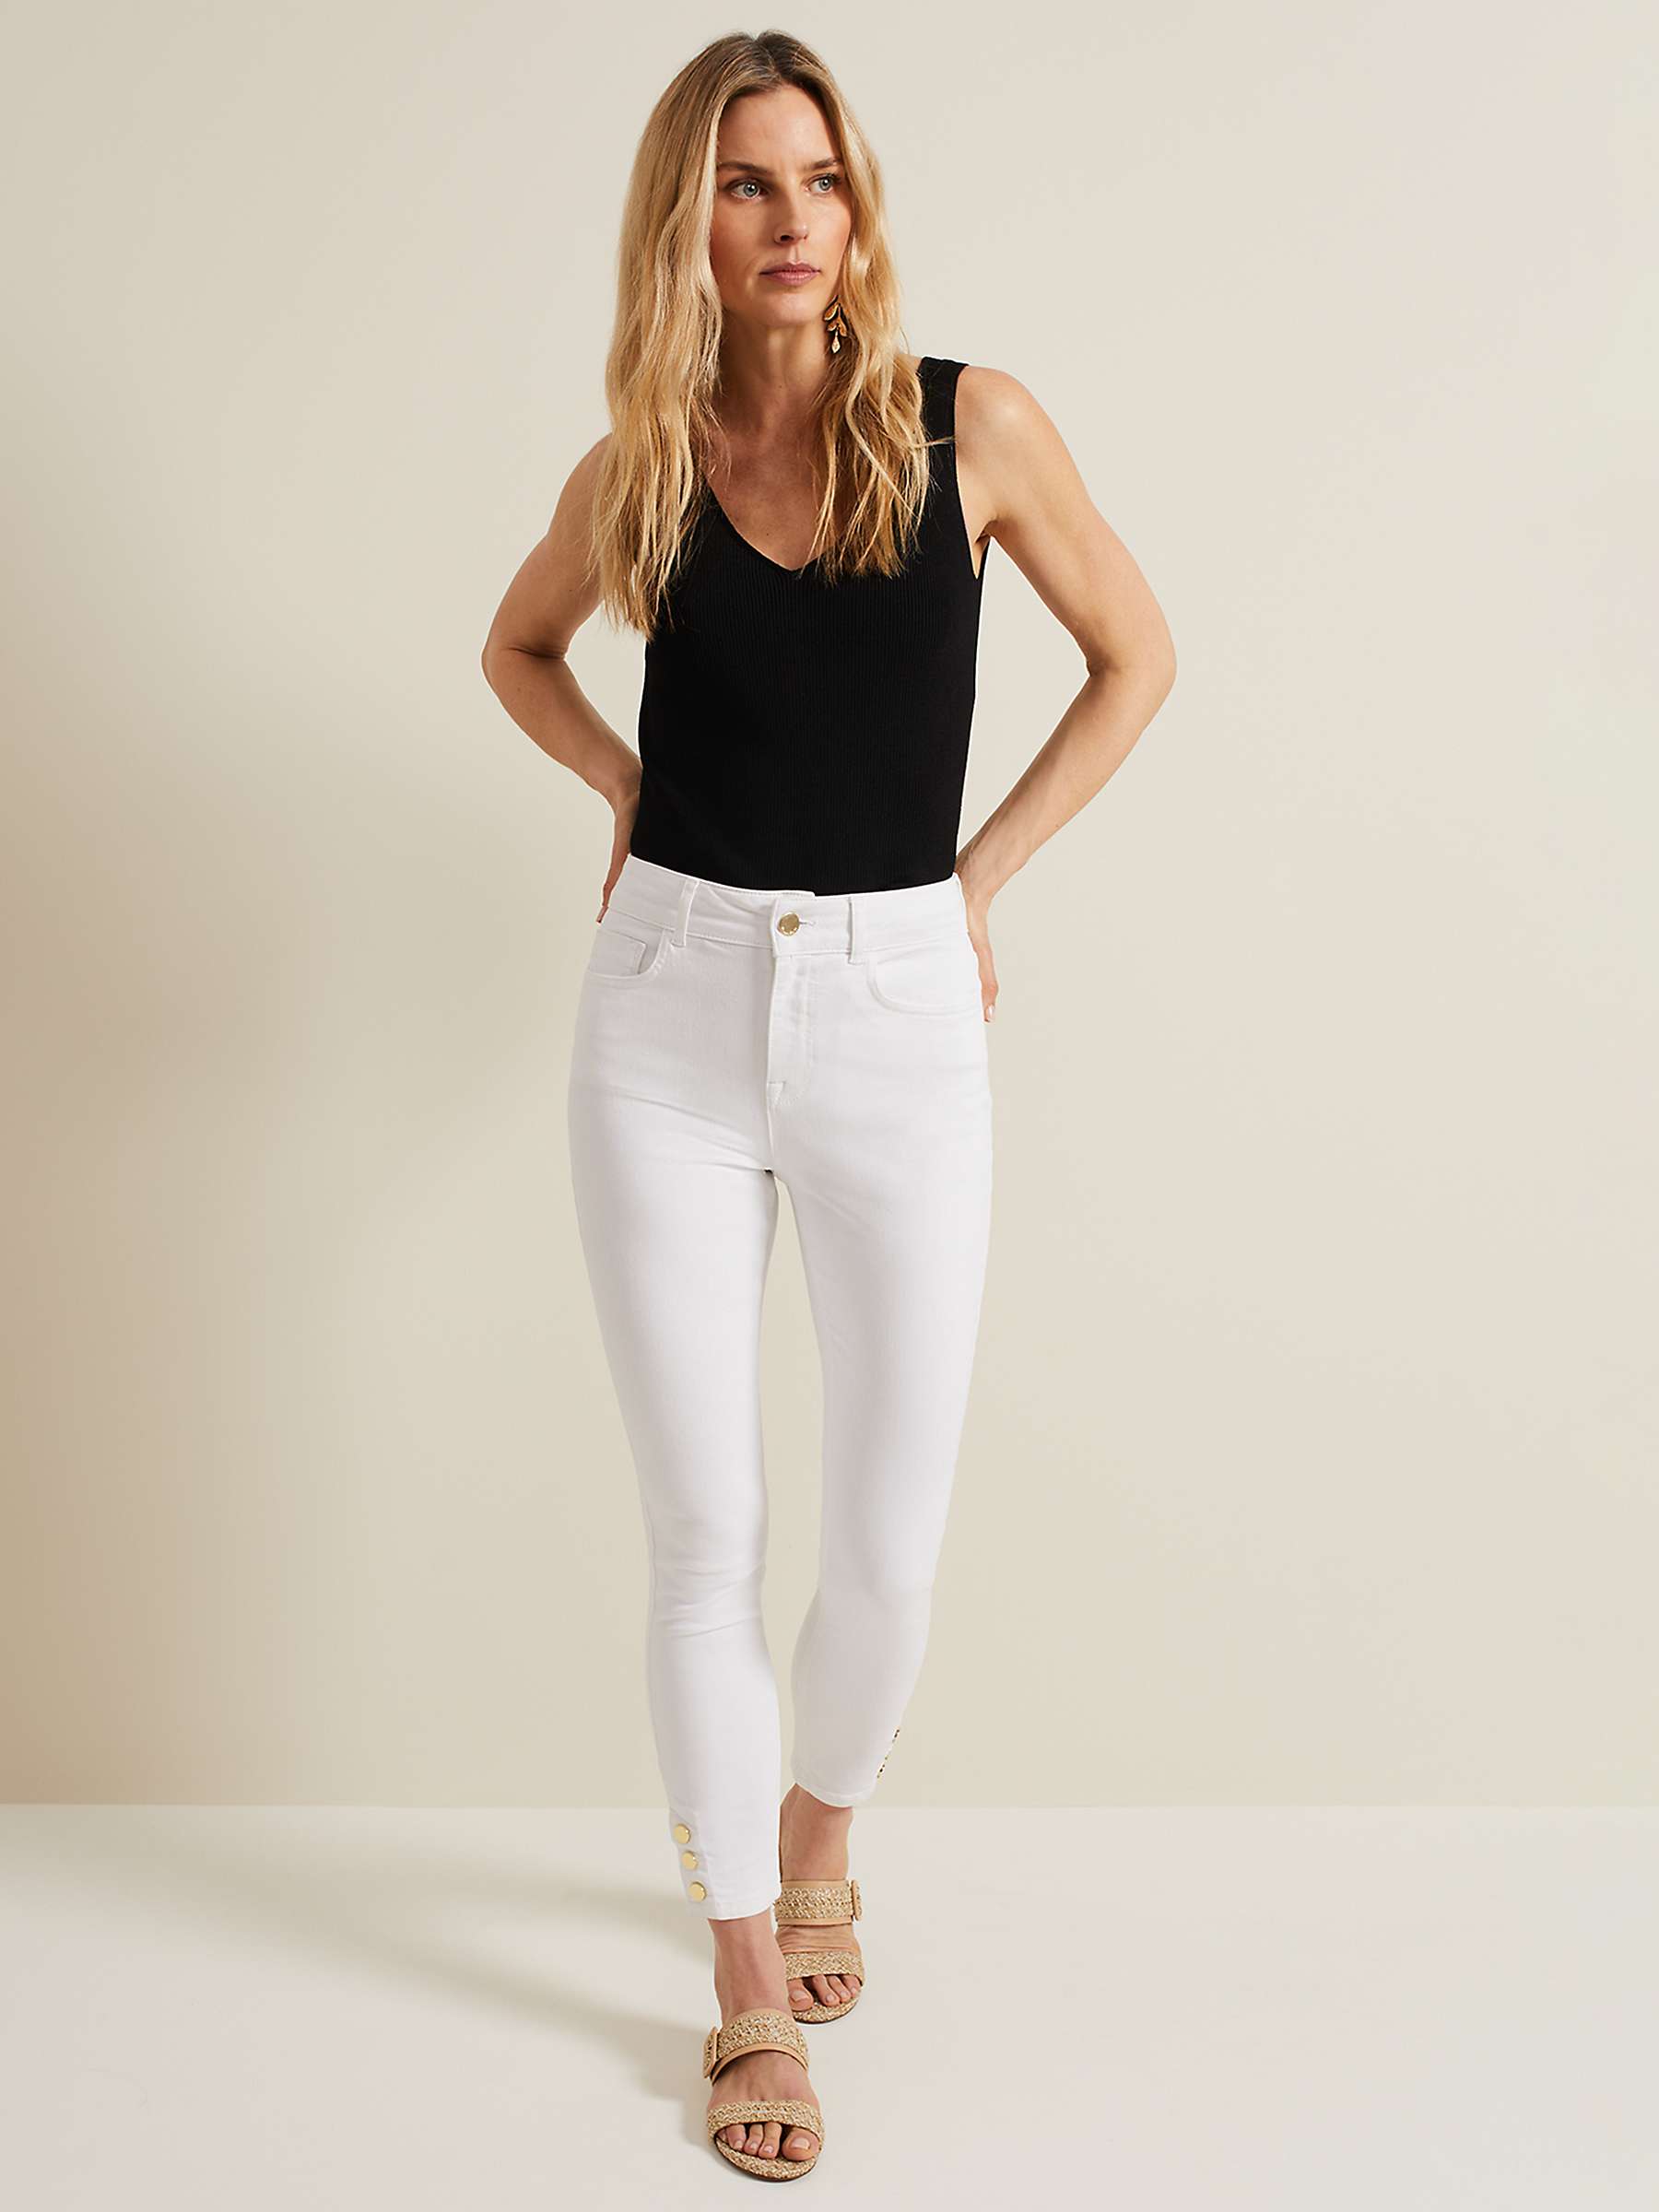 Buy Phase Eight Joelle Button Detail Skinny Jeans, White Online at johnlewis.com